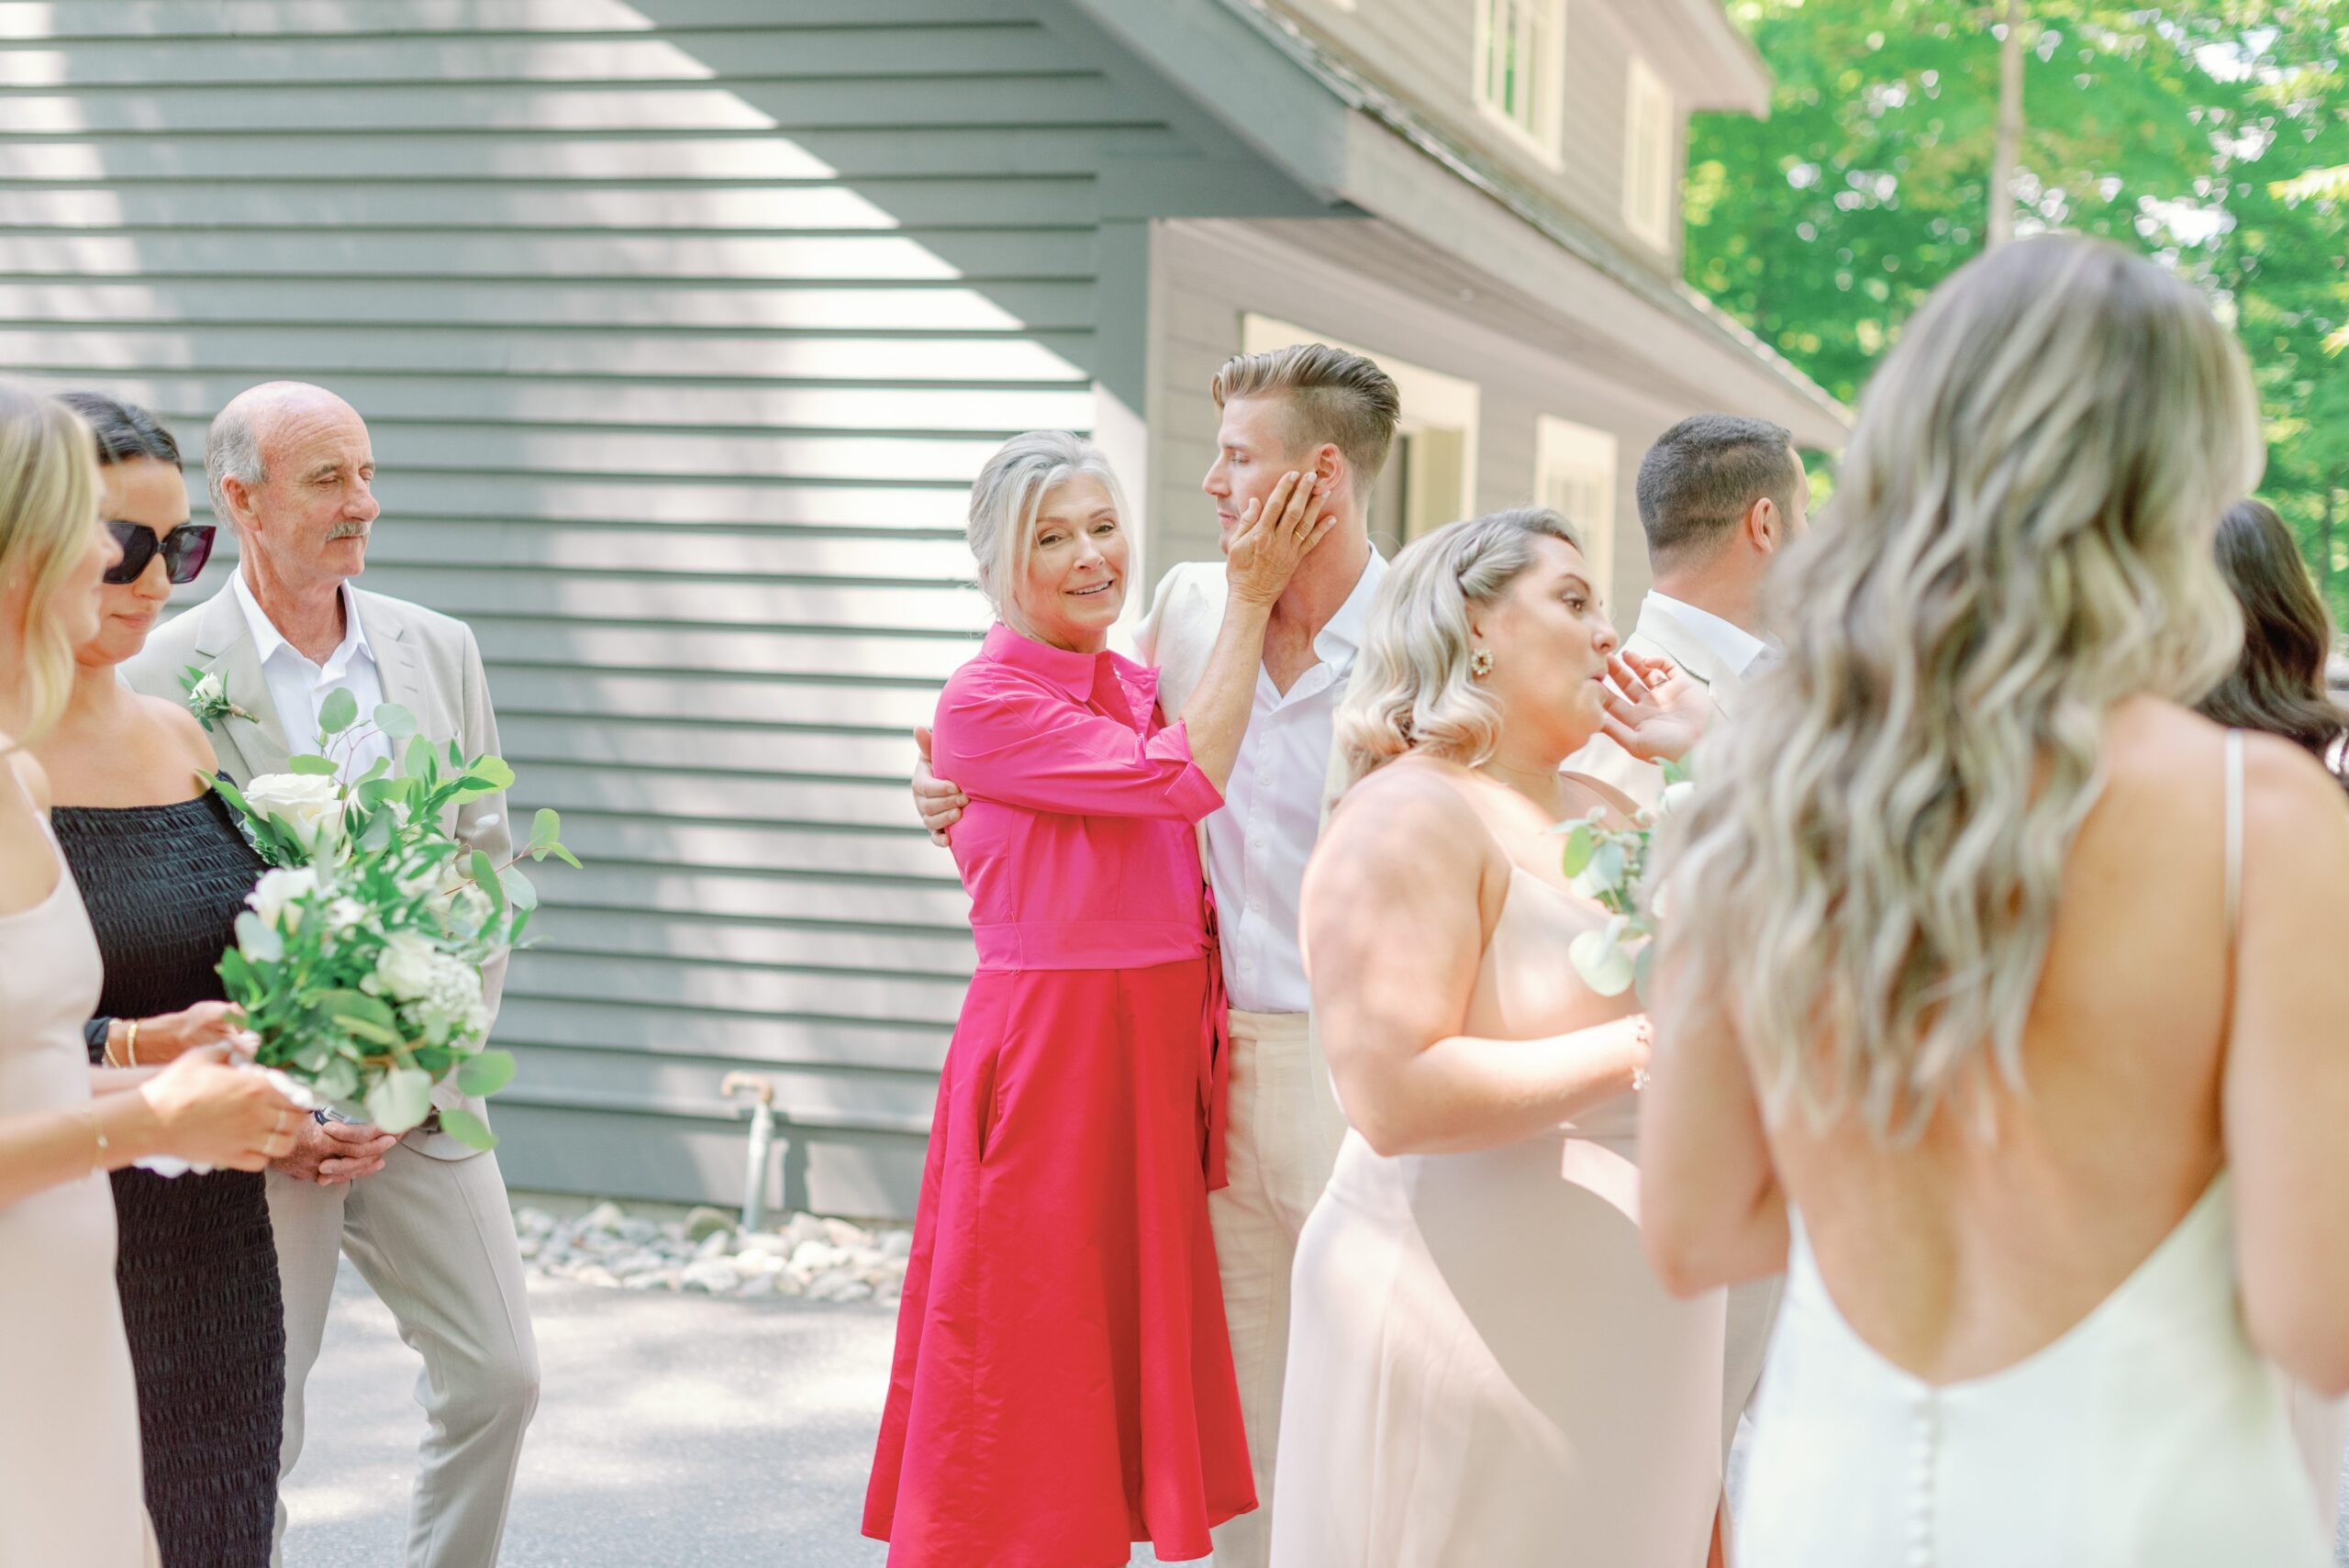 Cute moment between groom and mother at backyard wedding.